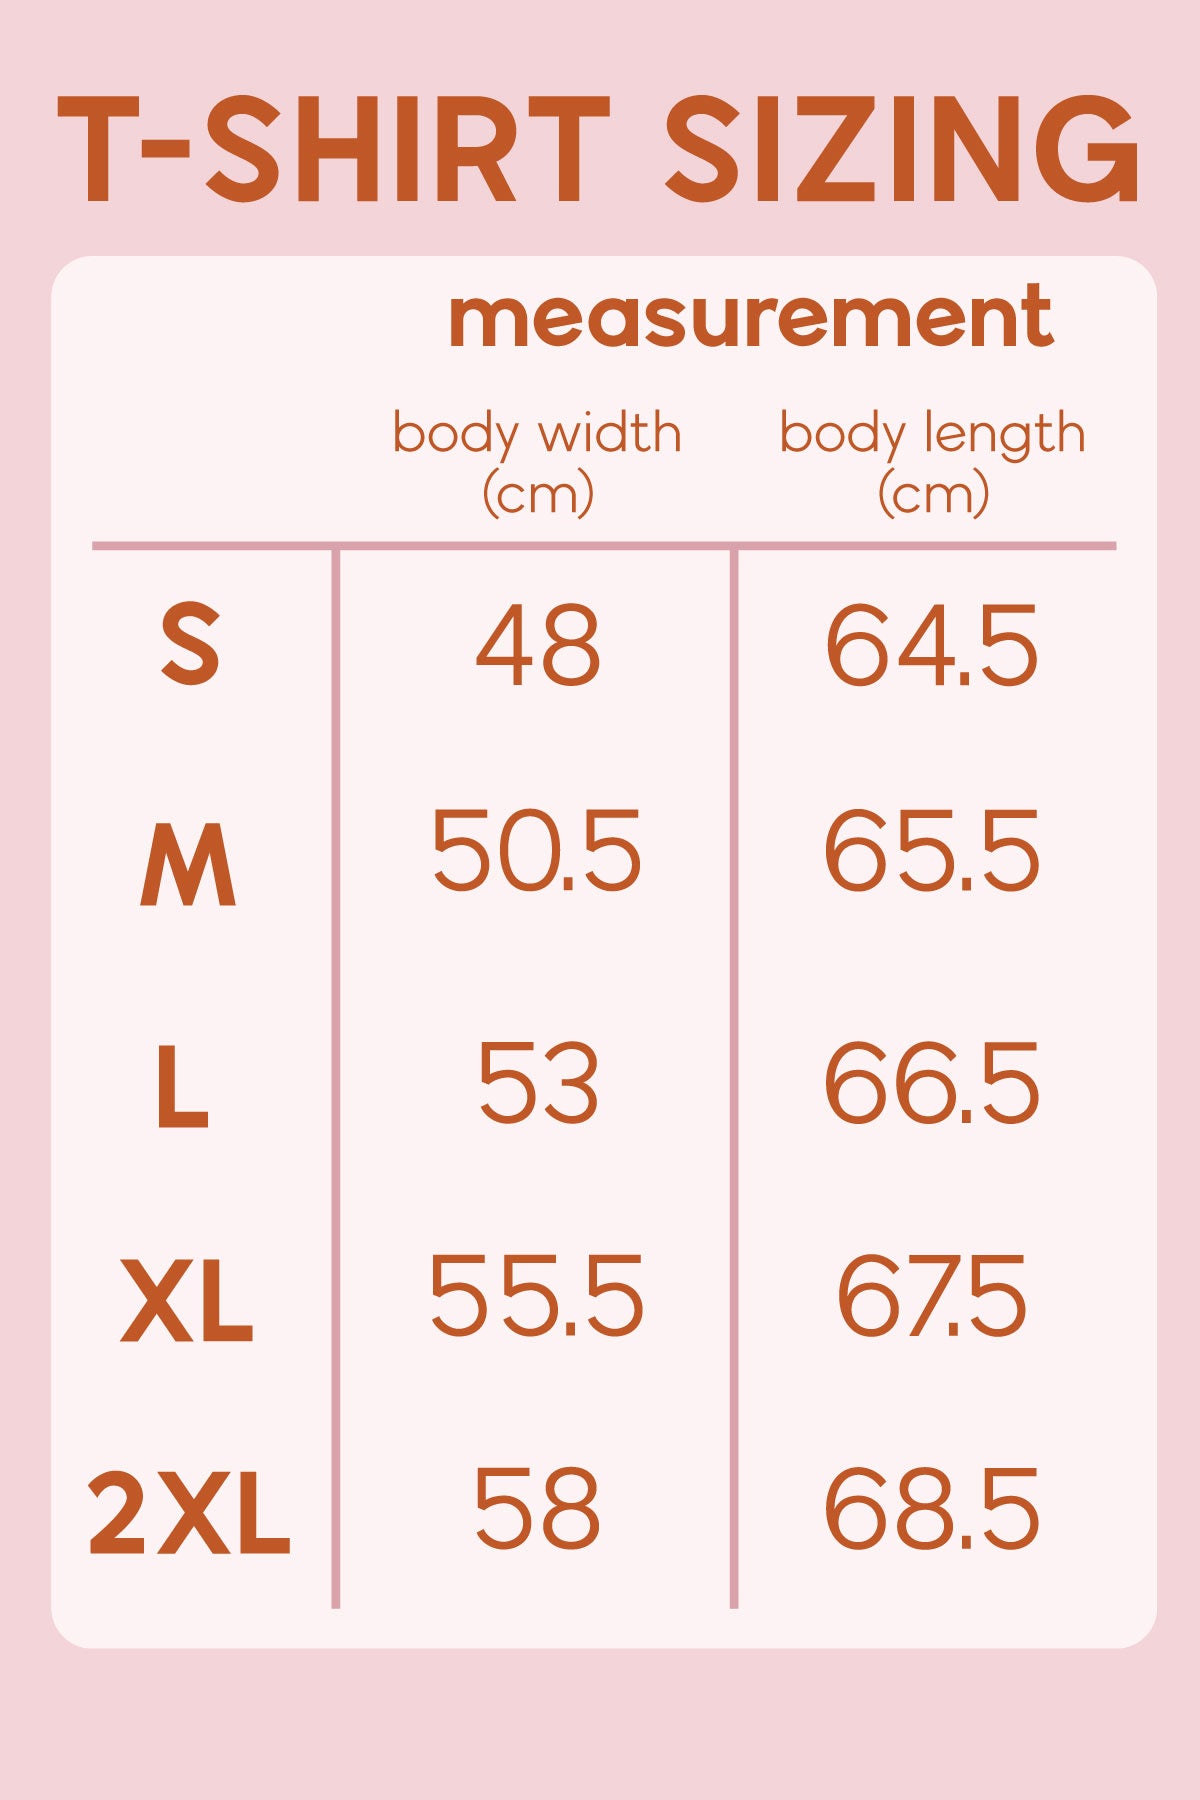 A T-shirt Size guide. The small size suits body width 48 centimeters and body length 64.5 centimeters. Medium size suits body width 50.5 centimeters and body length 65.5 centimeters. The large size suits a body width of 53cm and a body length of 66.5cm. The extra large size suits a body width of 55.5cm and a body length of 67.5cm. The two extra large suits a body width of 58cm and a body length of 68.5cm.